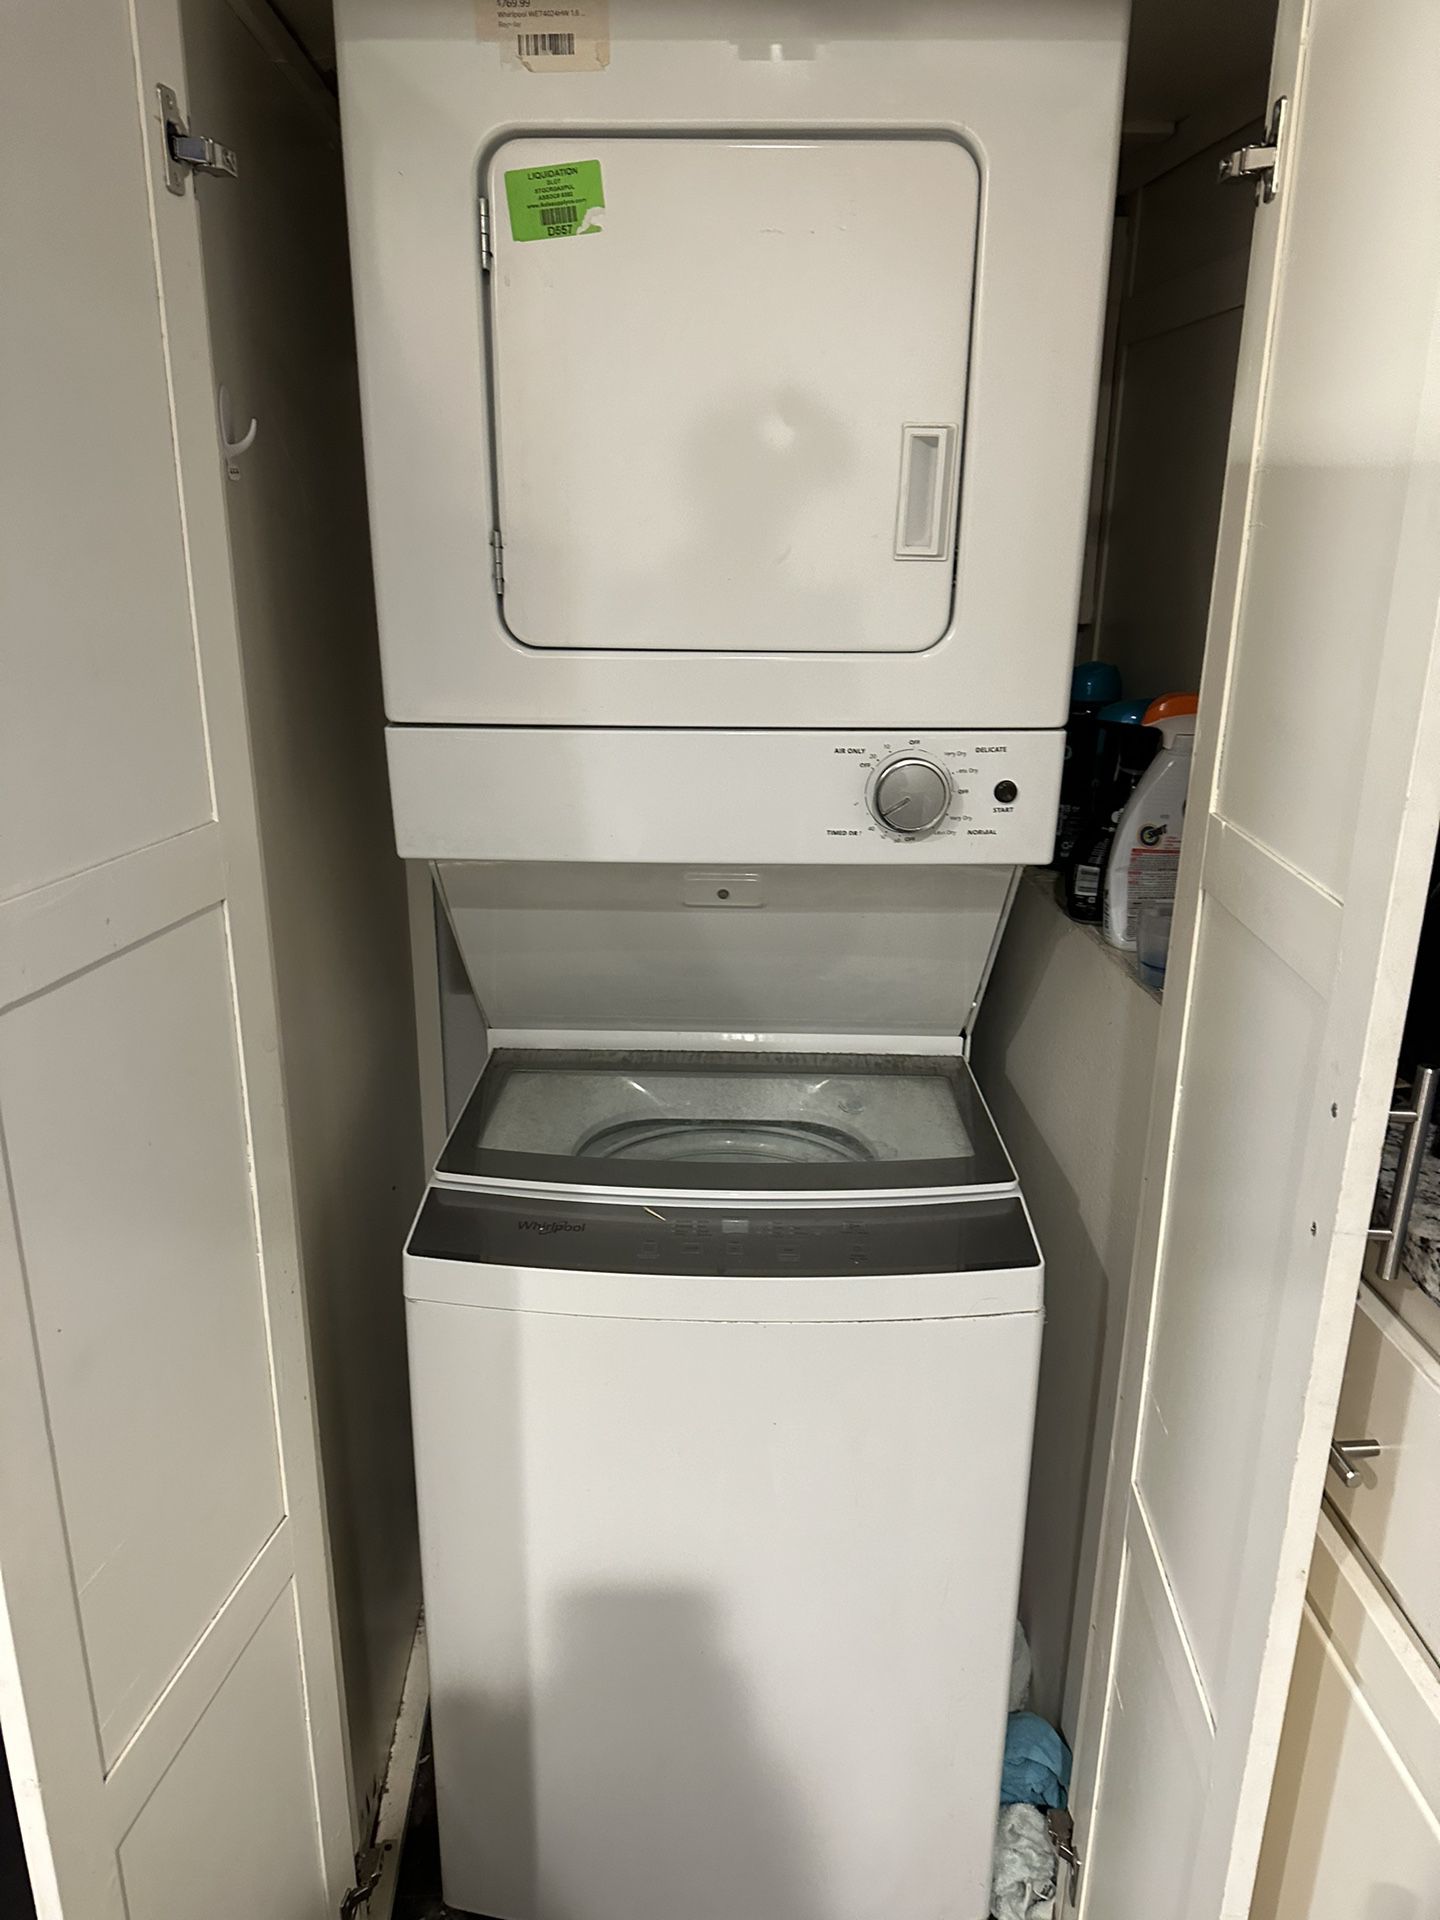 Whirlpool Stackable Washer And Driver 